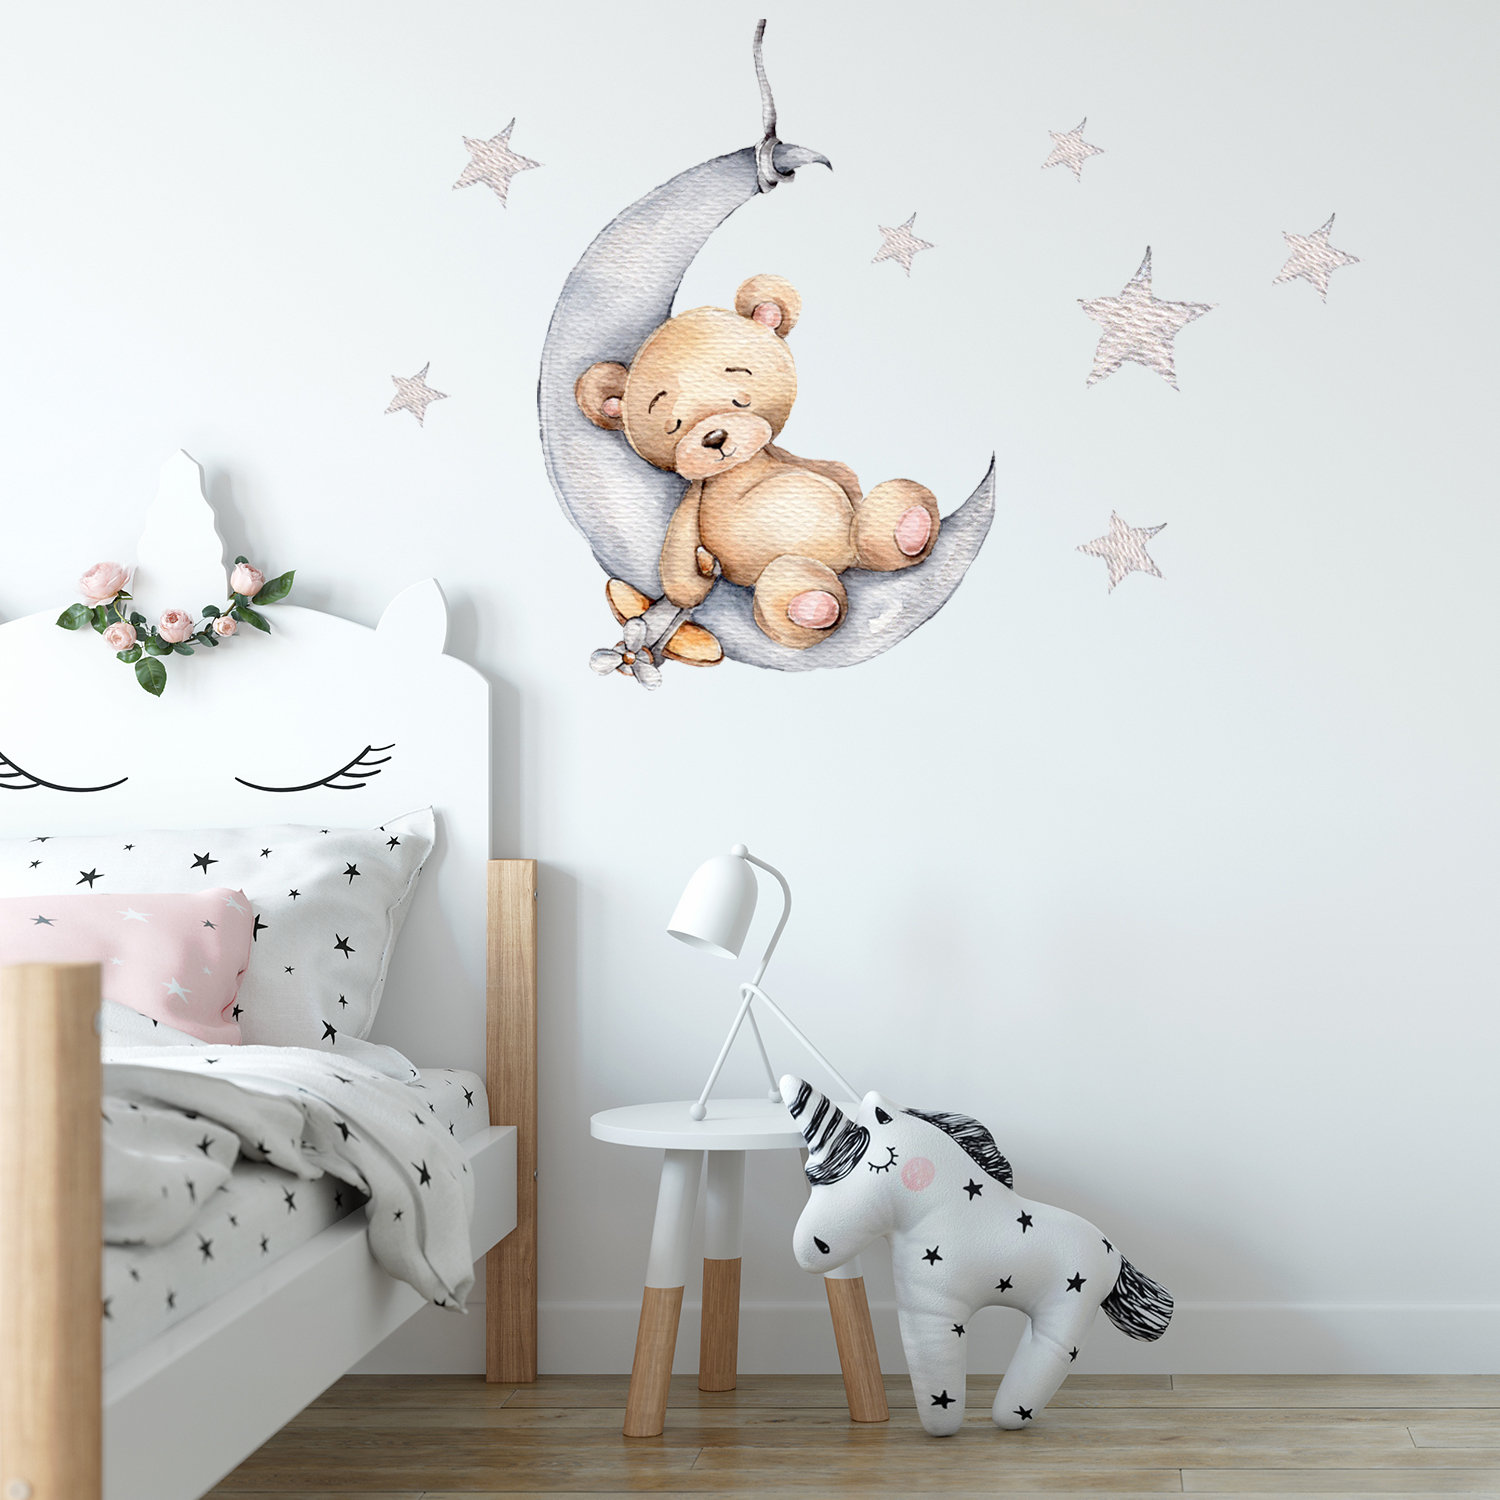 Babyshower Gift Bear Wall Etsy Teddy Wall Room Nursery Decal, Wall - Kid Decal, Bear Wall Nursery Room Decal, Decal, Baby Decal,